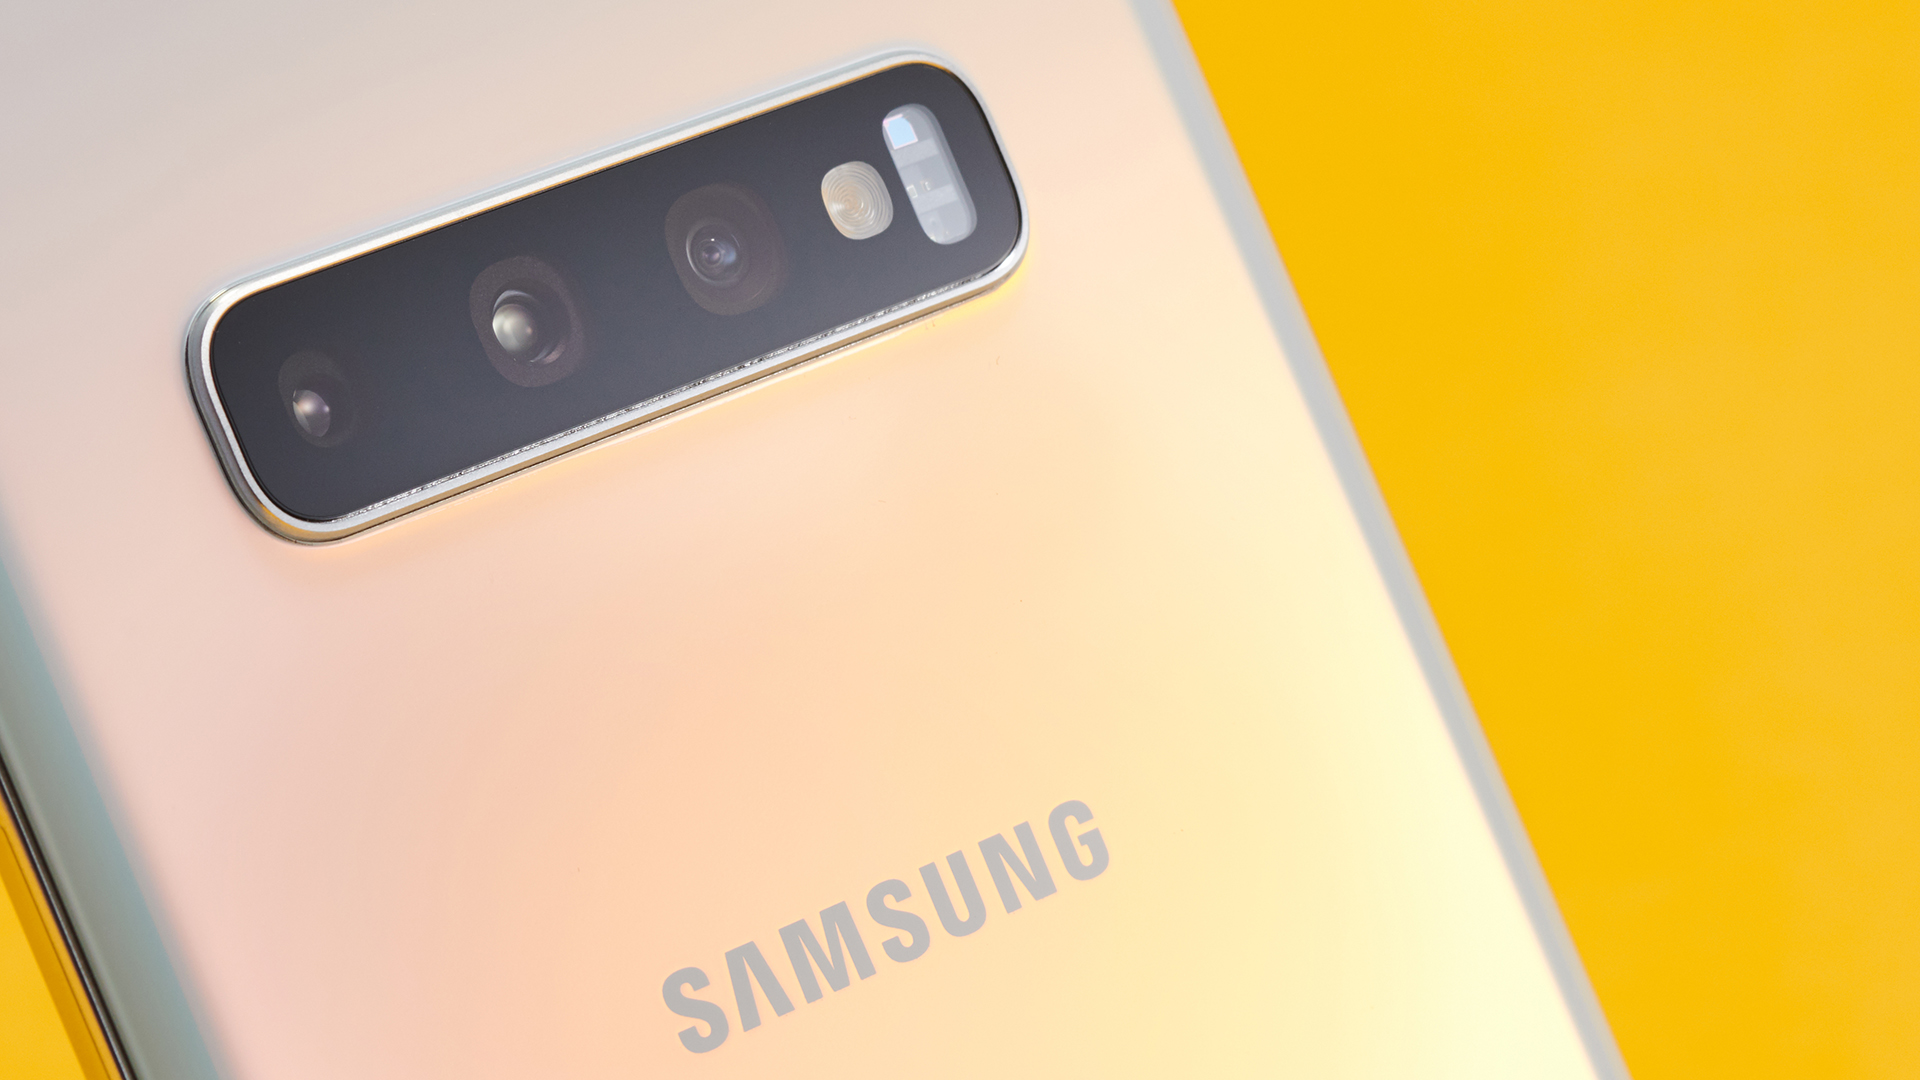 Samsung Galaxy A90 A70 And A60 Specs And Images Leaked Techradar